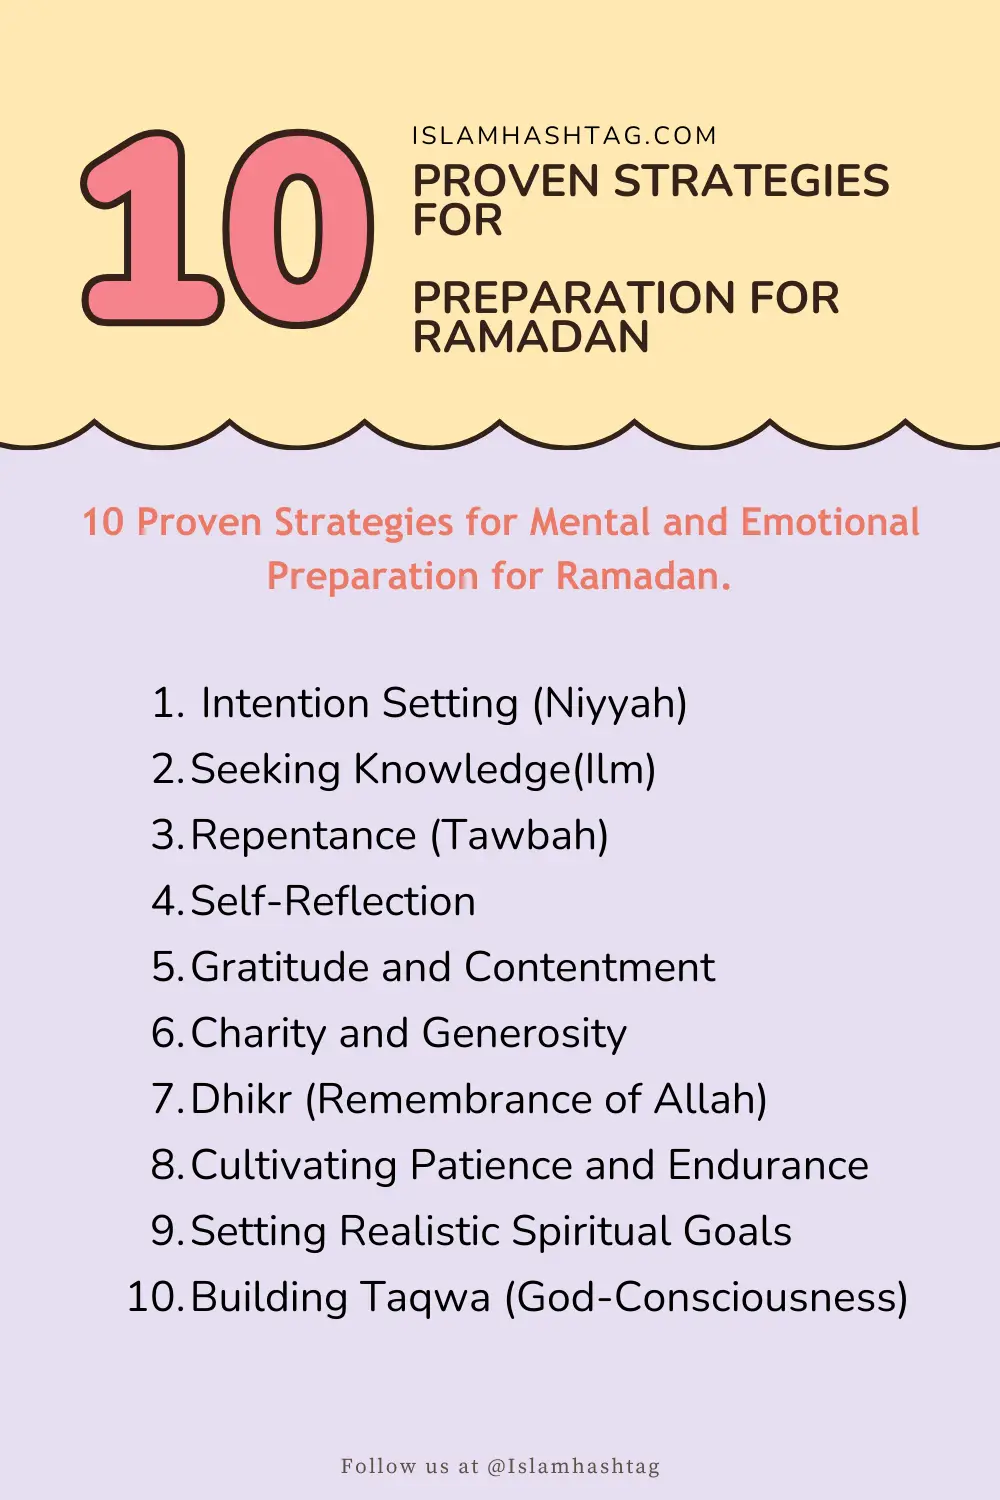  Preparation For Ramadan,10 Proven Strategies For Mental And Emotional Preparation.